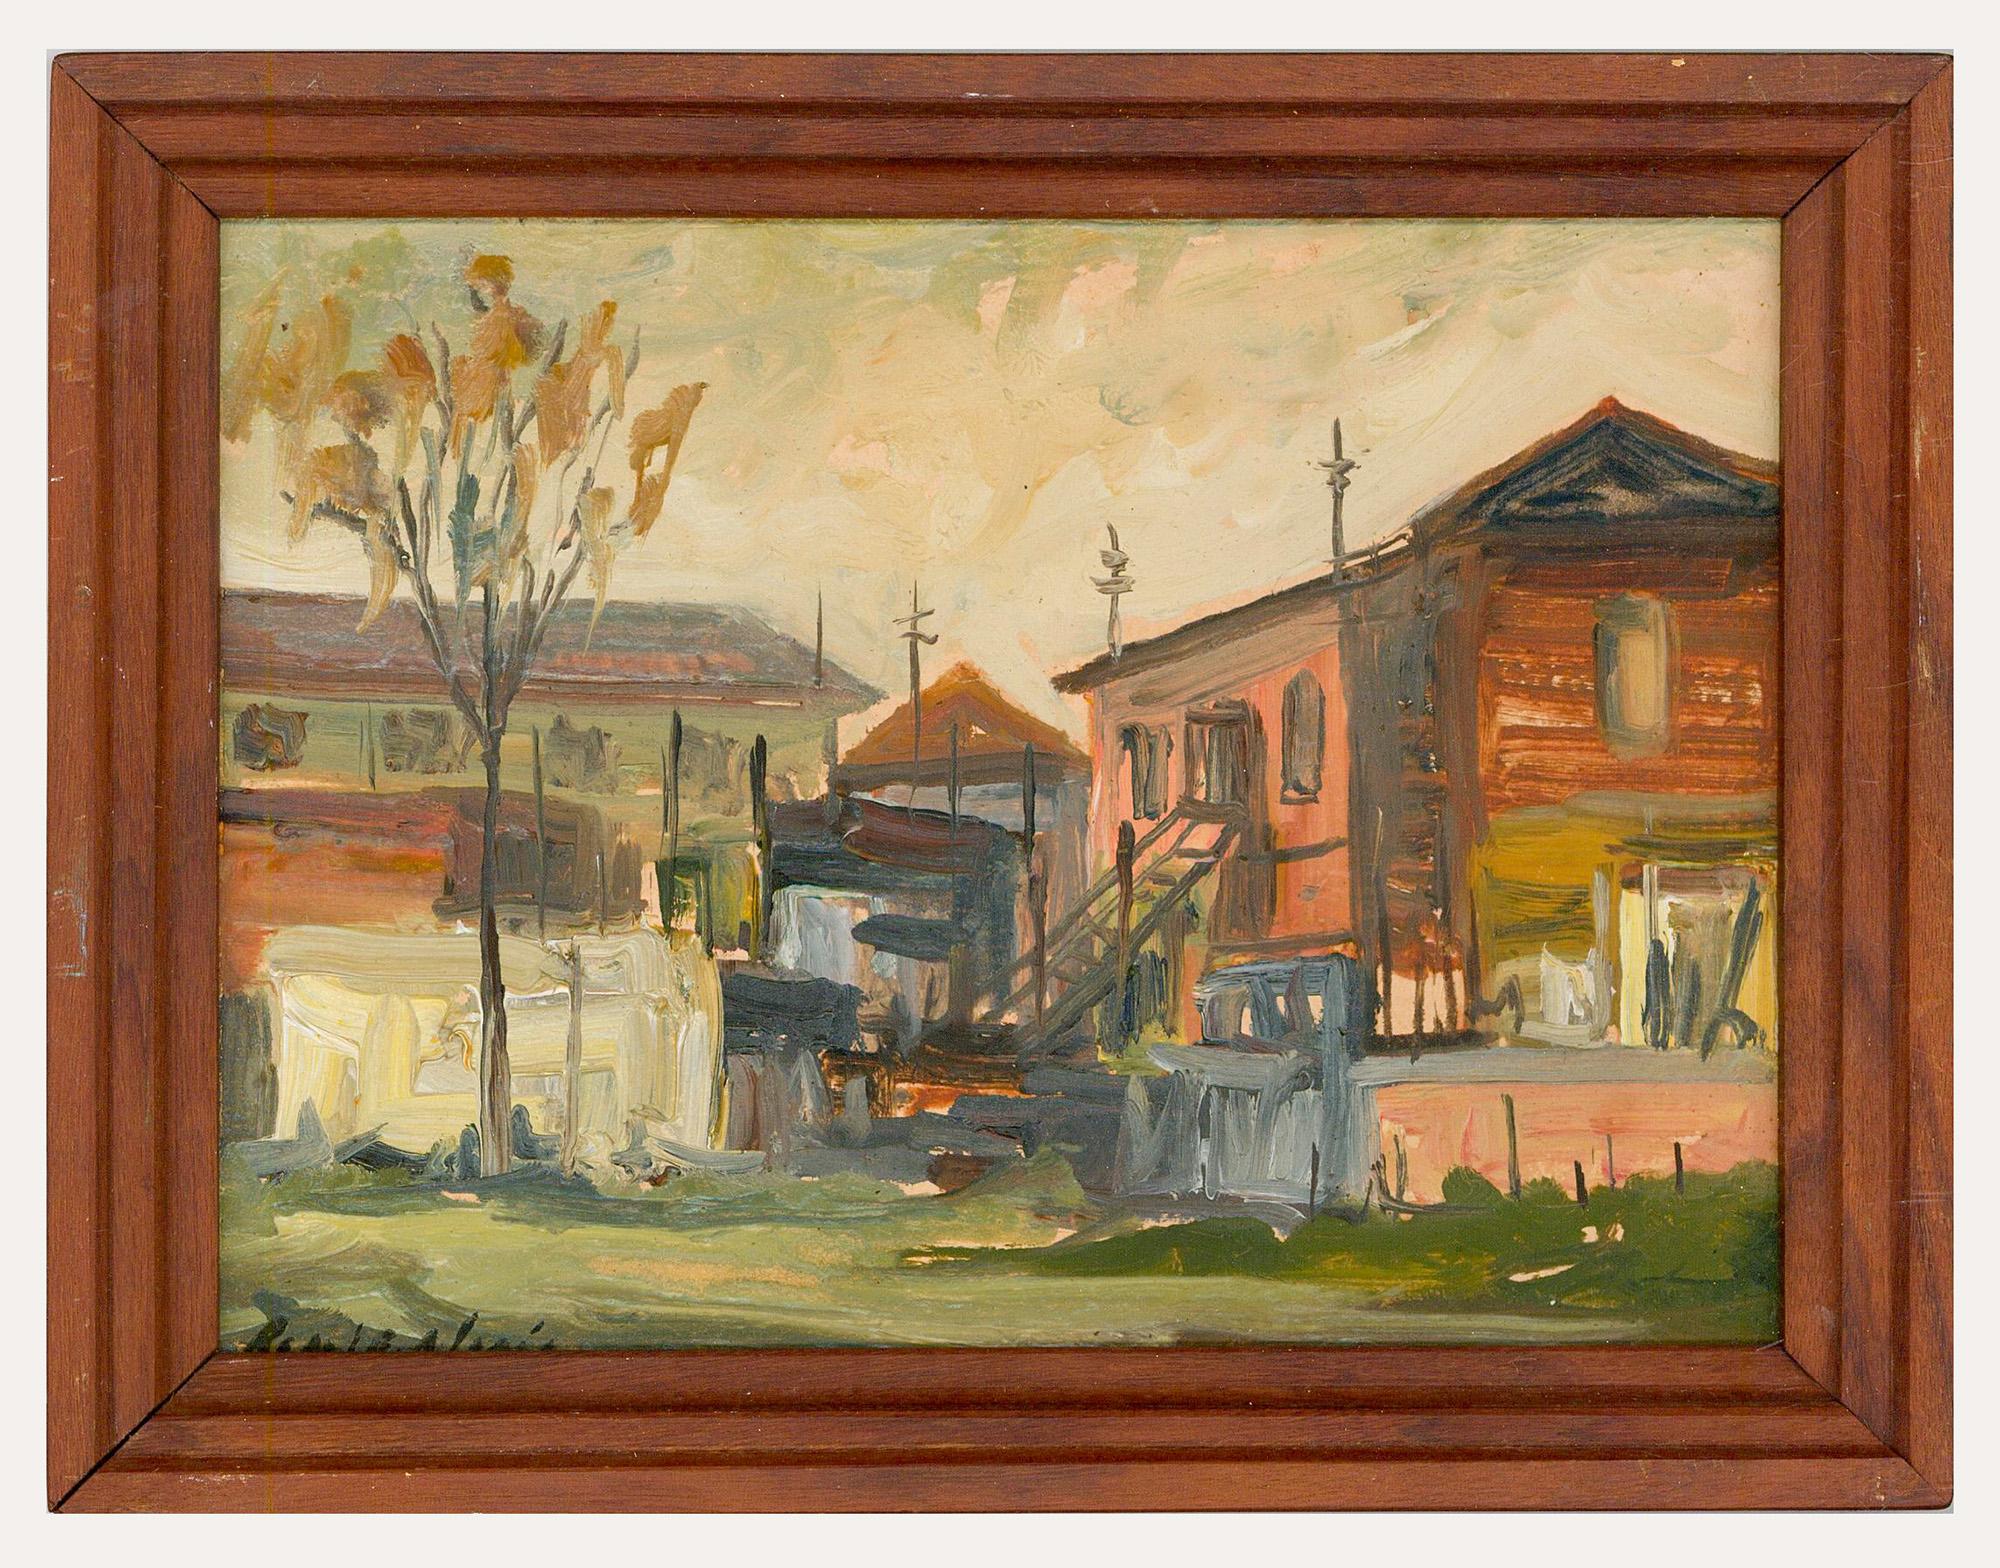 Unknown Landscape Painting - Framed 20th Century Oil - Rural Landscape with Rustic Buildings